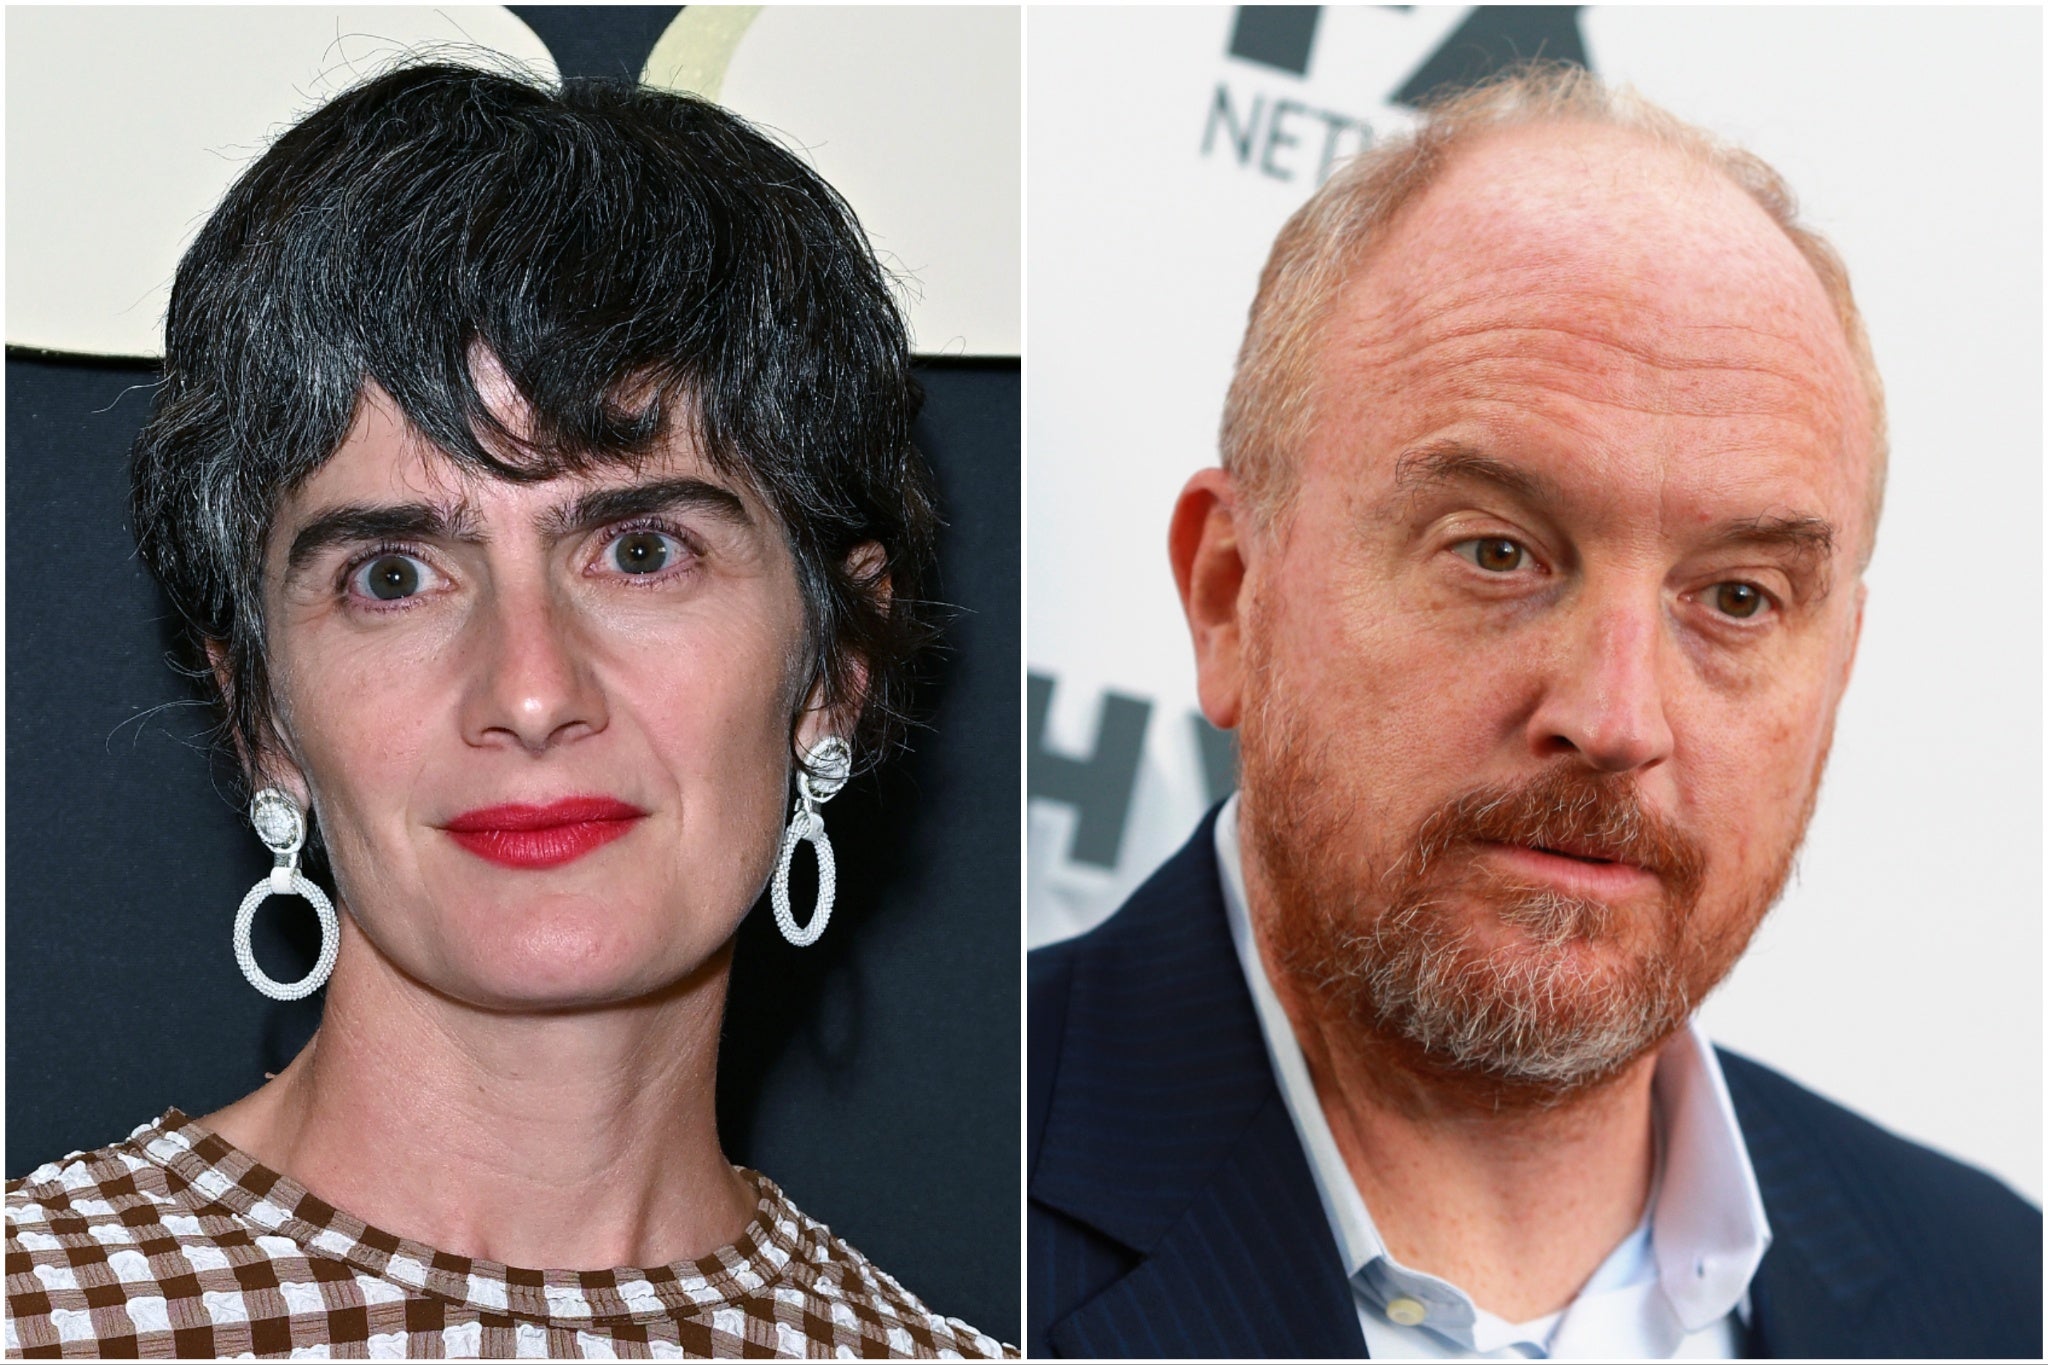 Hoffman played Louis CK’s love interest in the 2012 series ‘Louie’